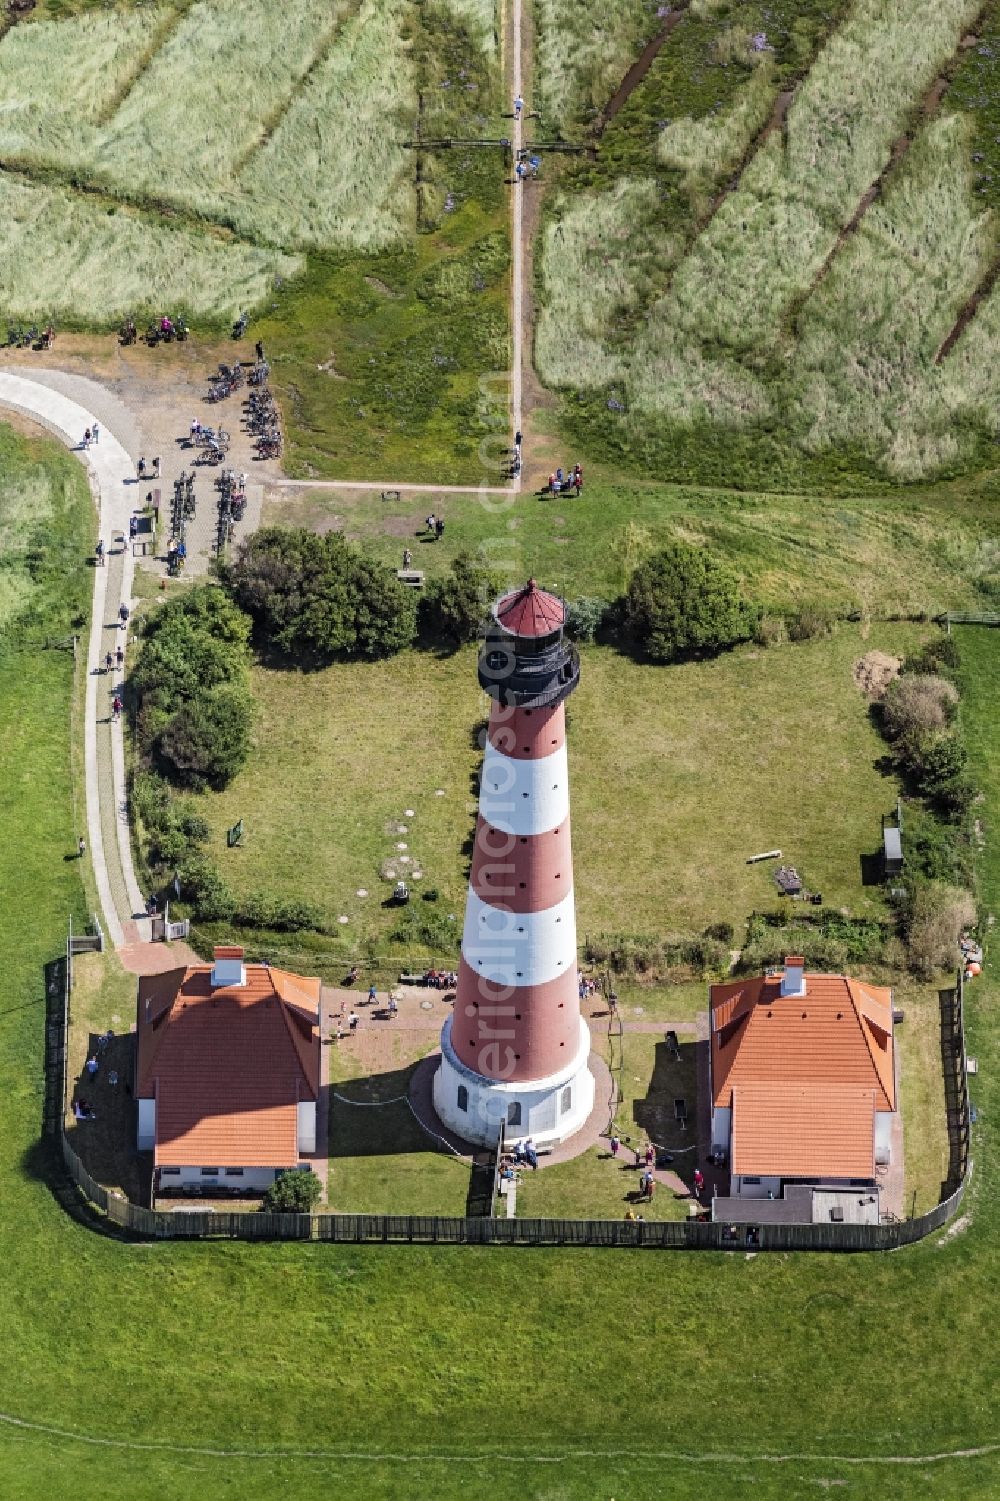 Westerhever from above - Lighthouse as a historic seafaring character in the coastal area of North Sea in the district Hauert in Westerhever in the state Schleswig-Holstein